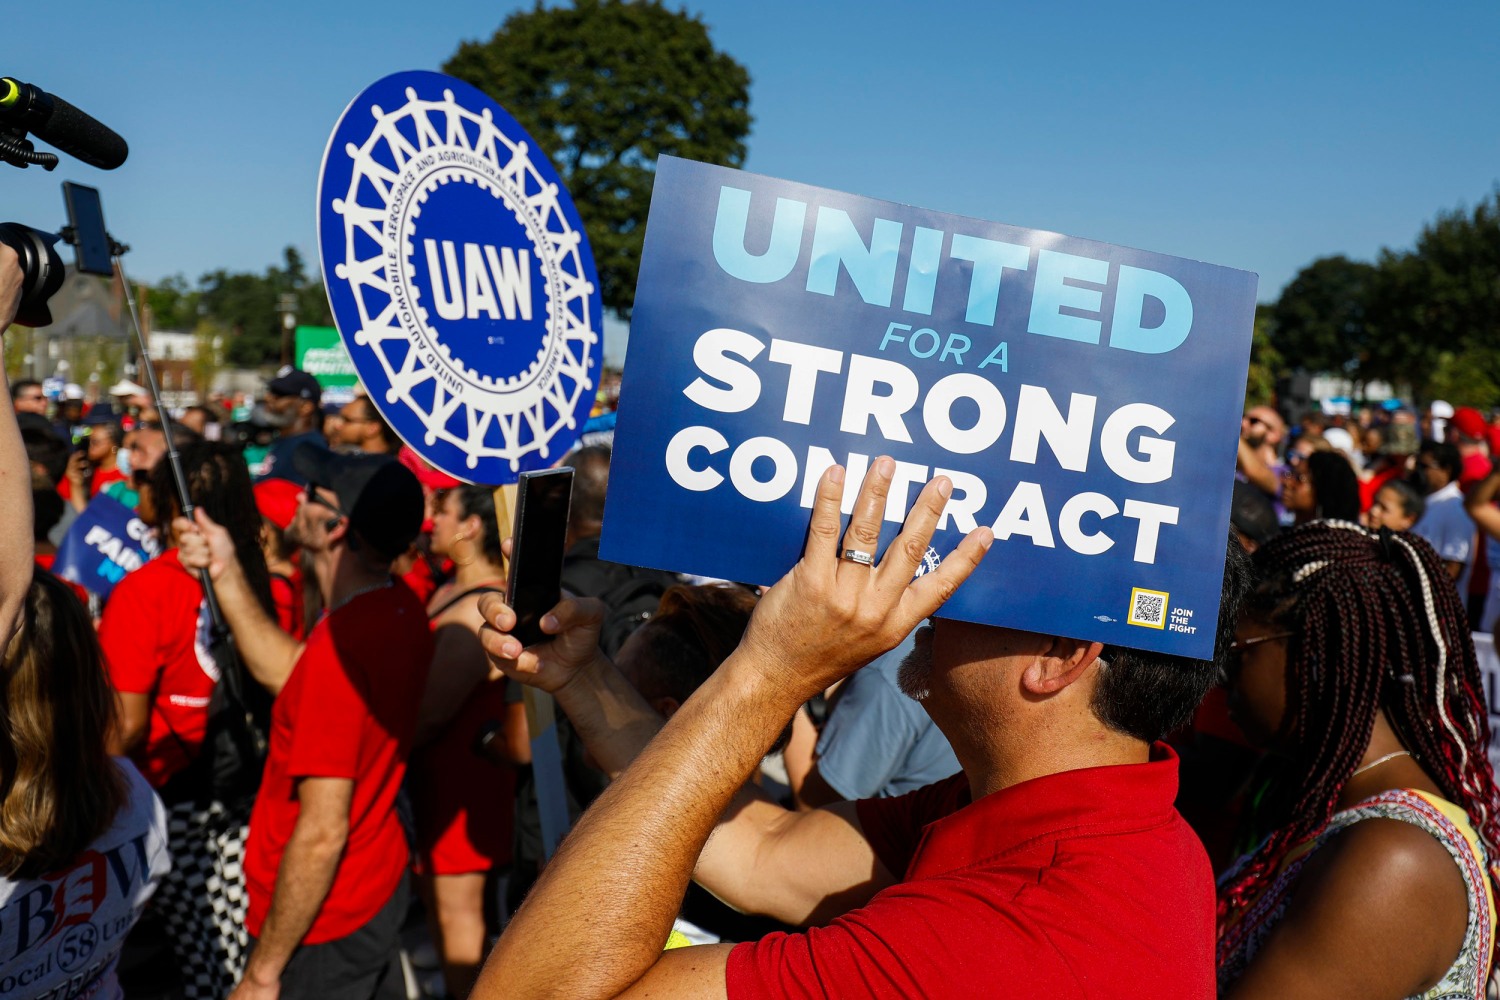 Everything you need to know about the potential UAW strike